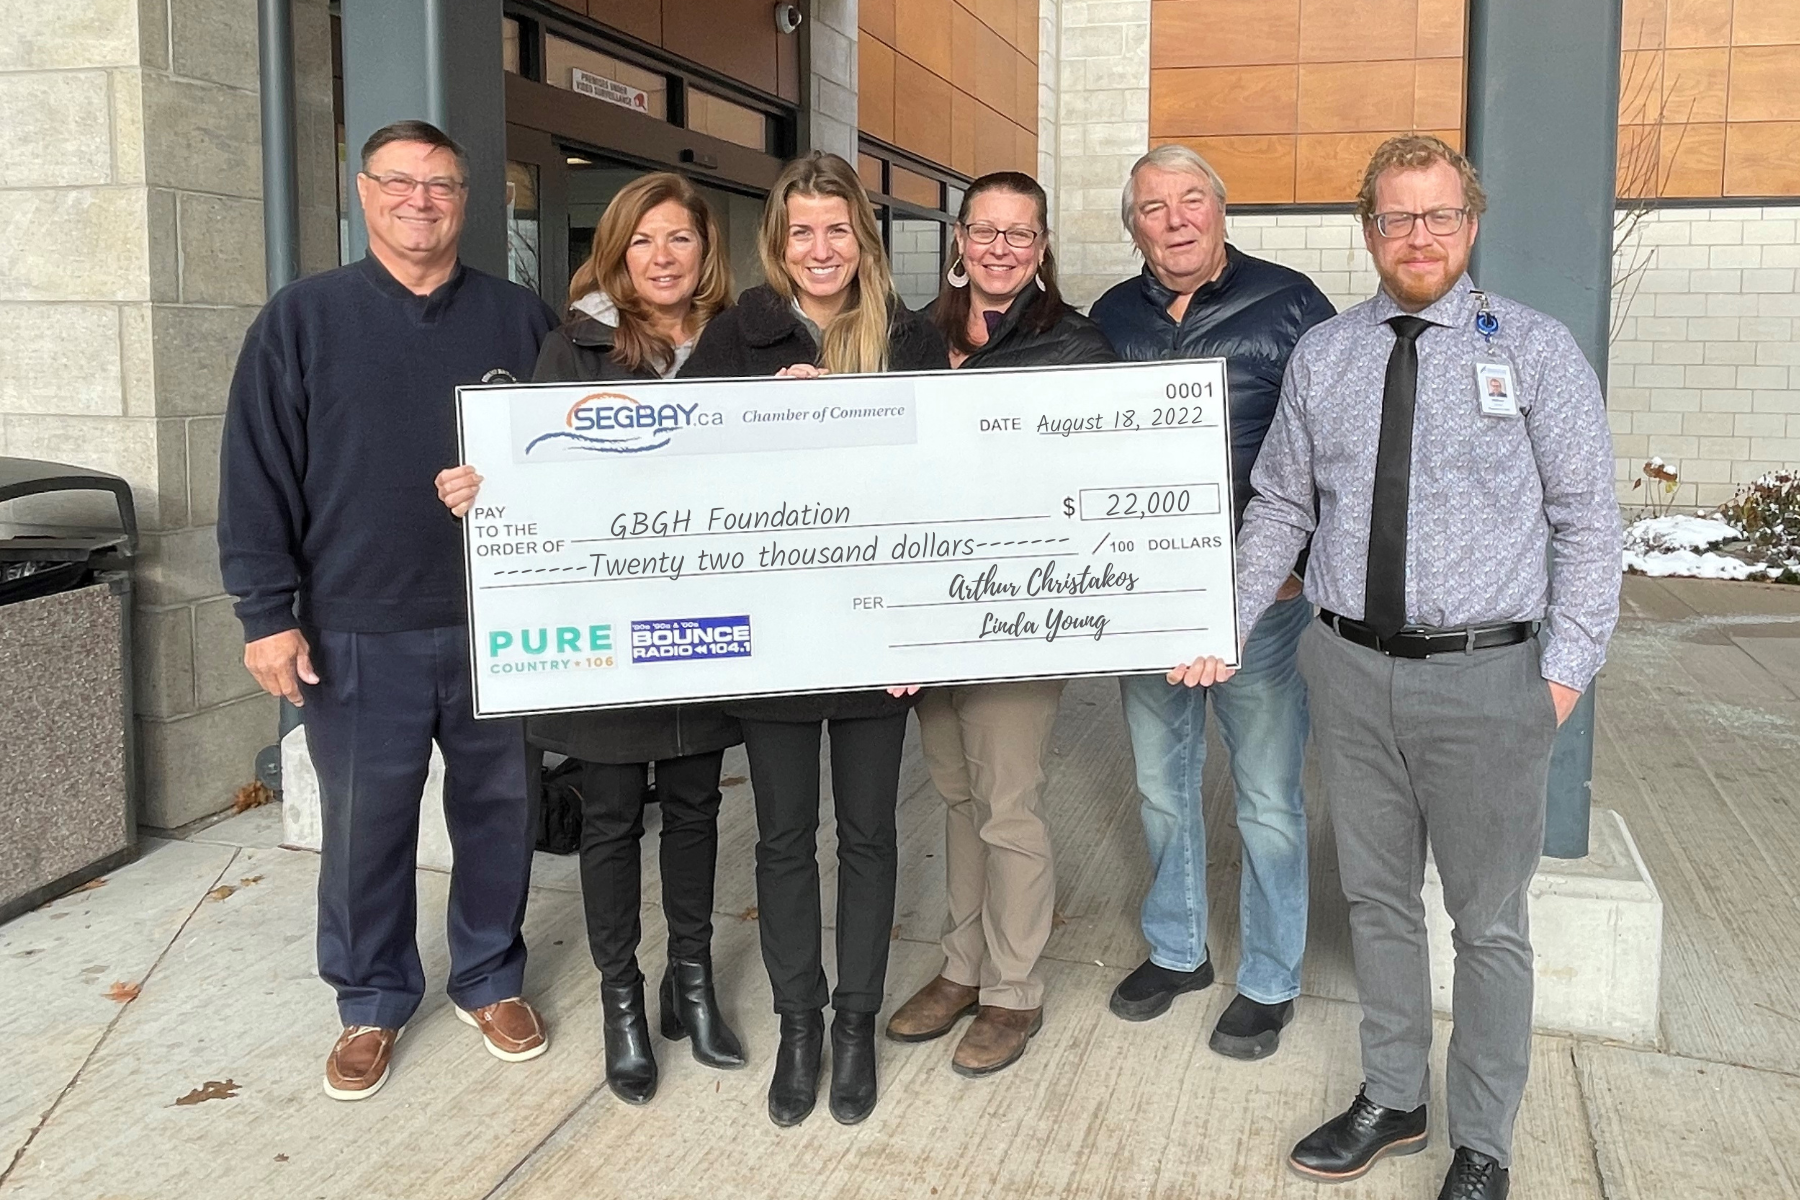 Three women and three men hold a giant cheque for $22,000 to the GBGH foundation from SE Georgian Bay Chamber of Commerces, Pure Country 106 and Bounce Radio 104.1